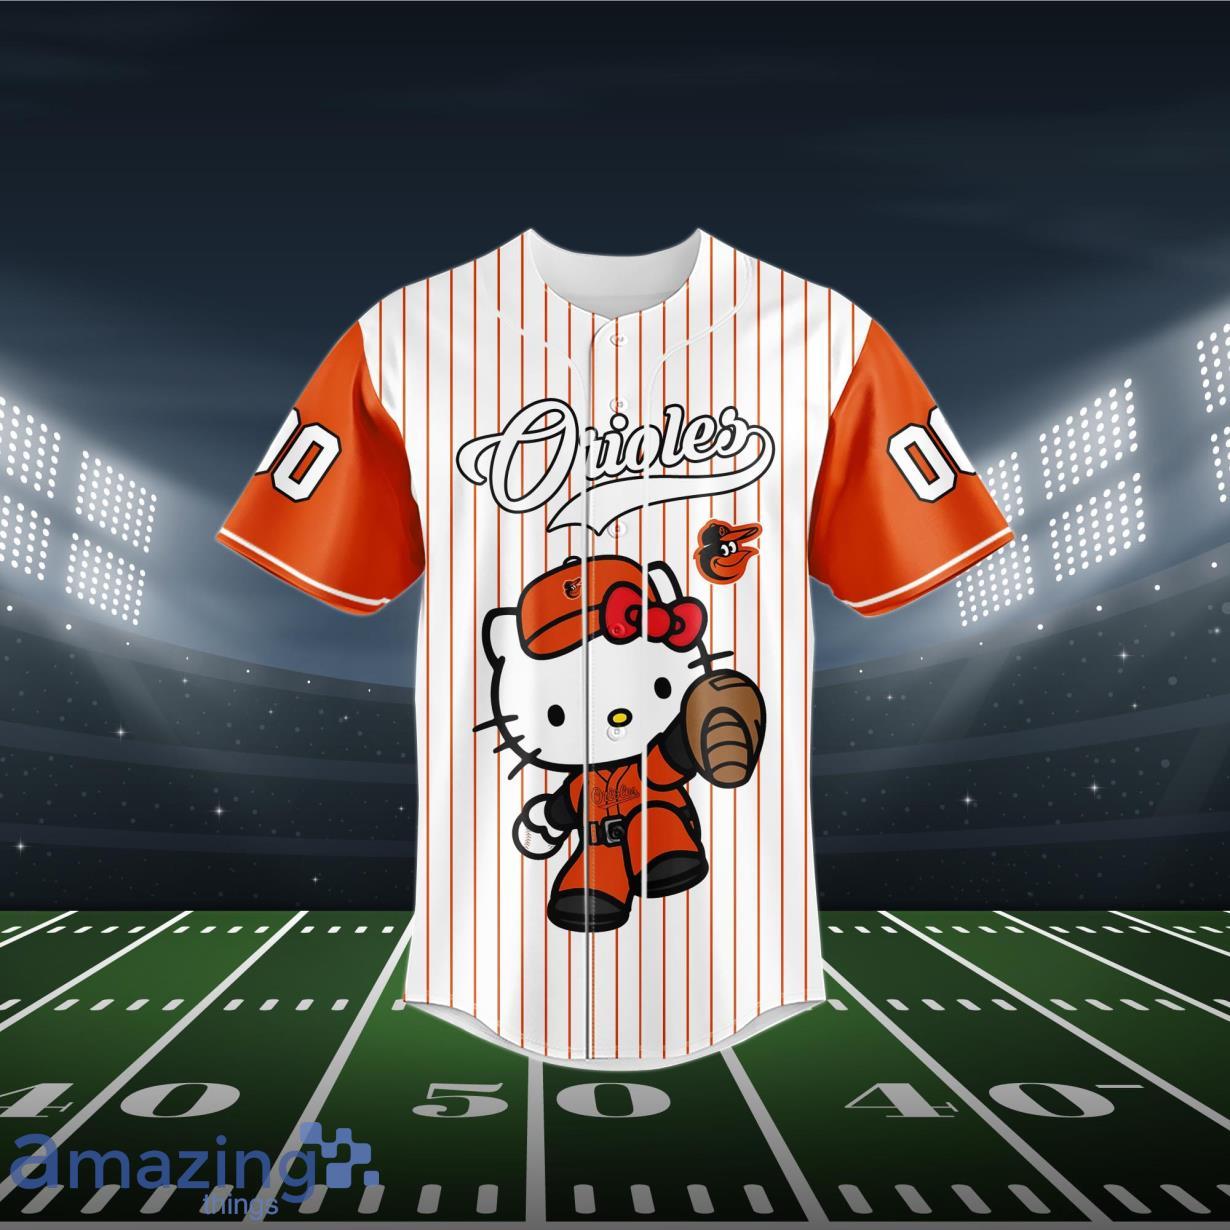 Baltimore Orioles Baseball Jersey Shirt Customize Name & Number Full Size  S-5XL